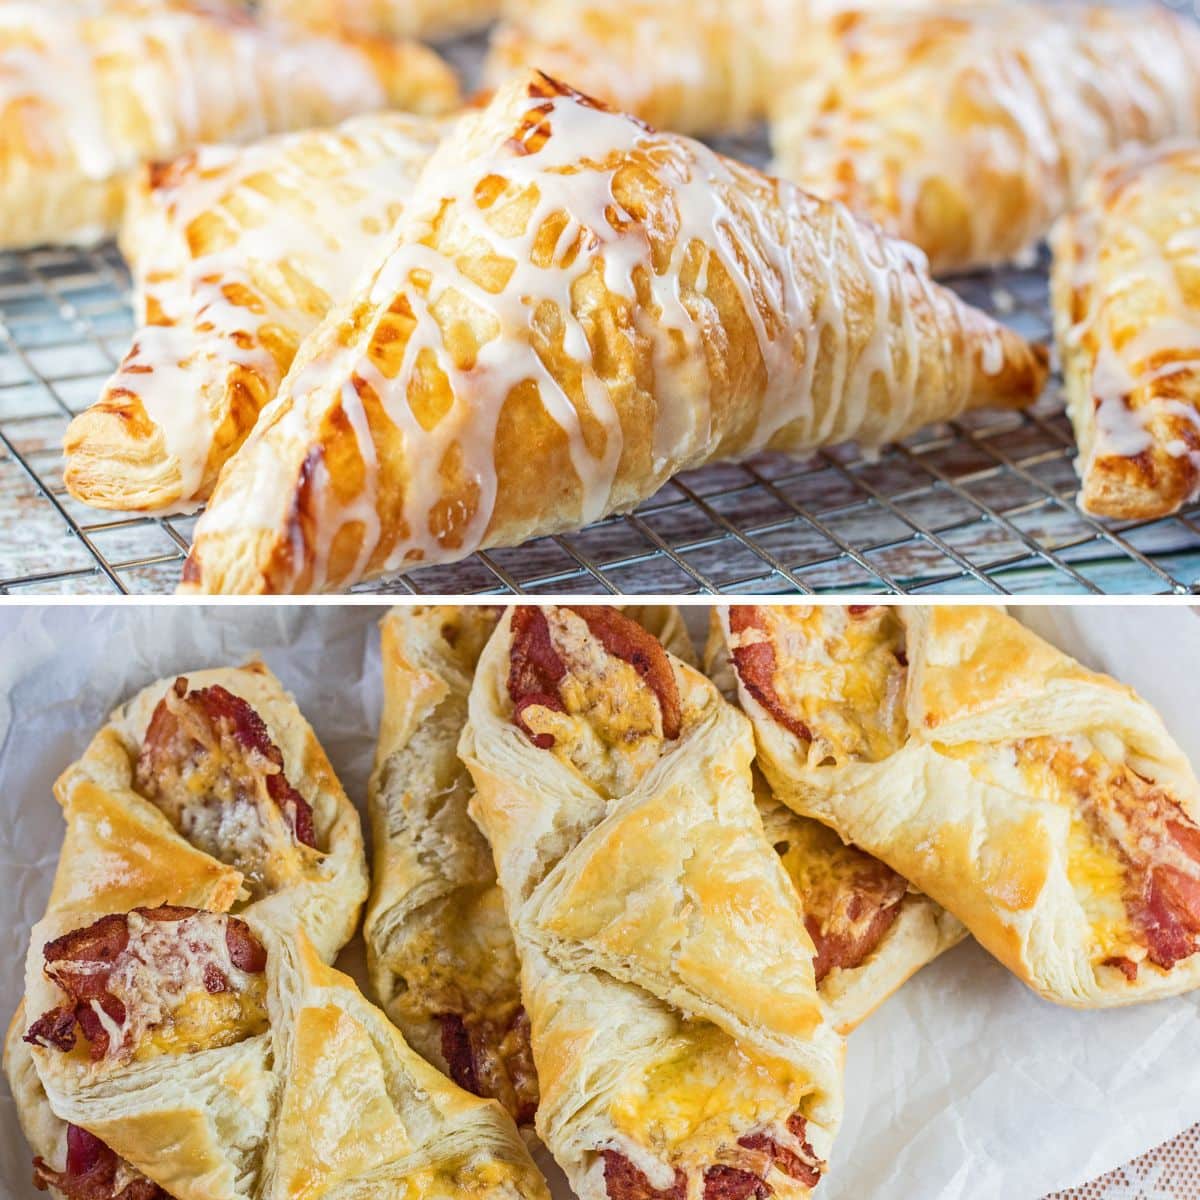 Best Turnovers Recipes: Puff Pastry Apple Turnovers (+15 More Baked Turnovers!)